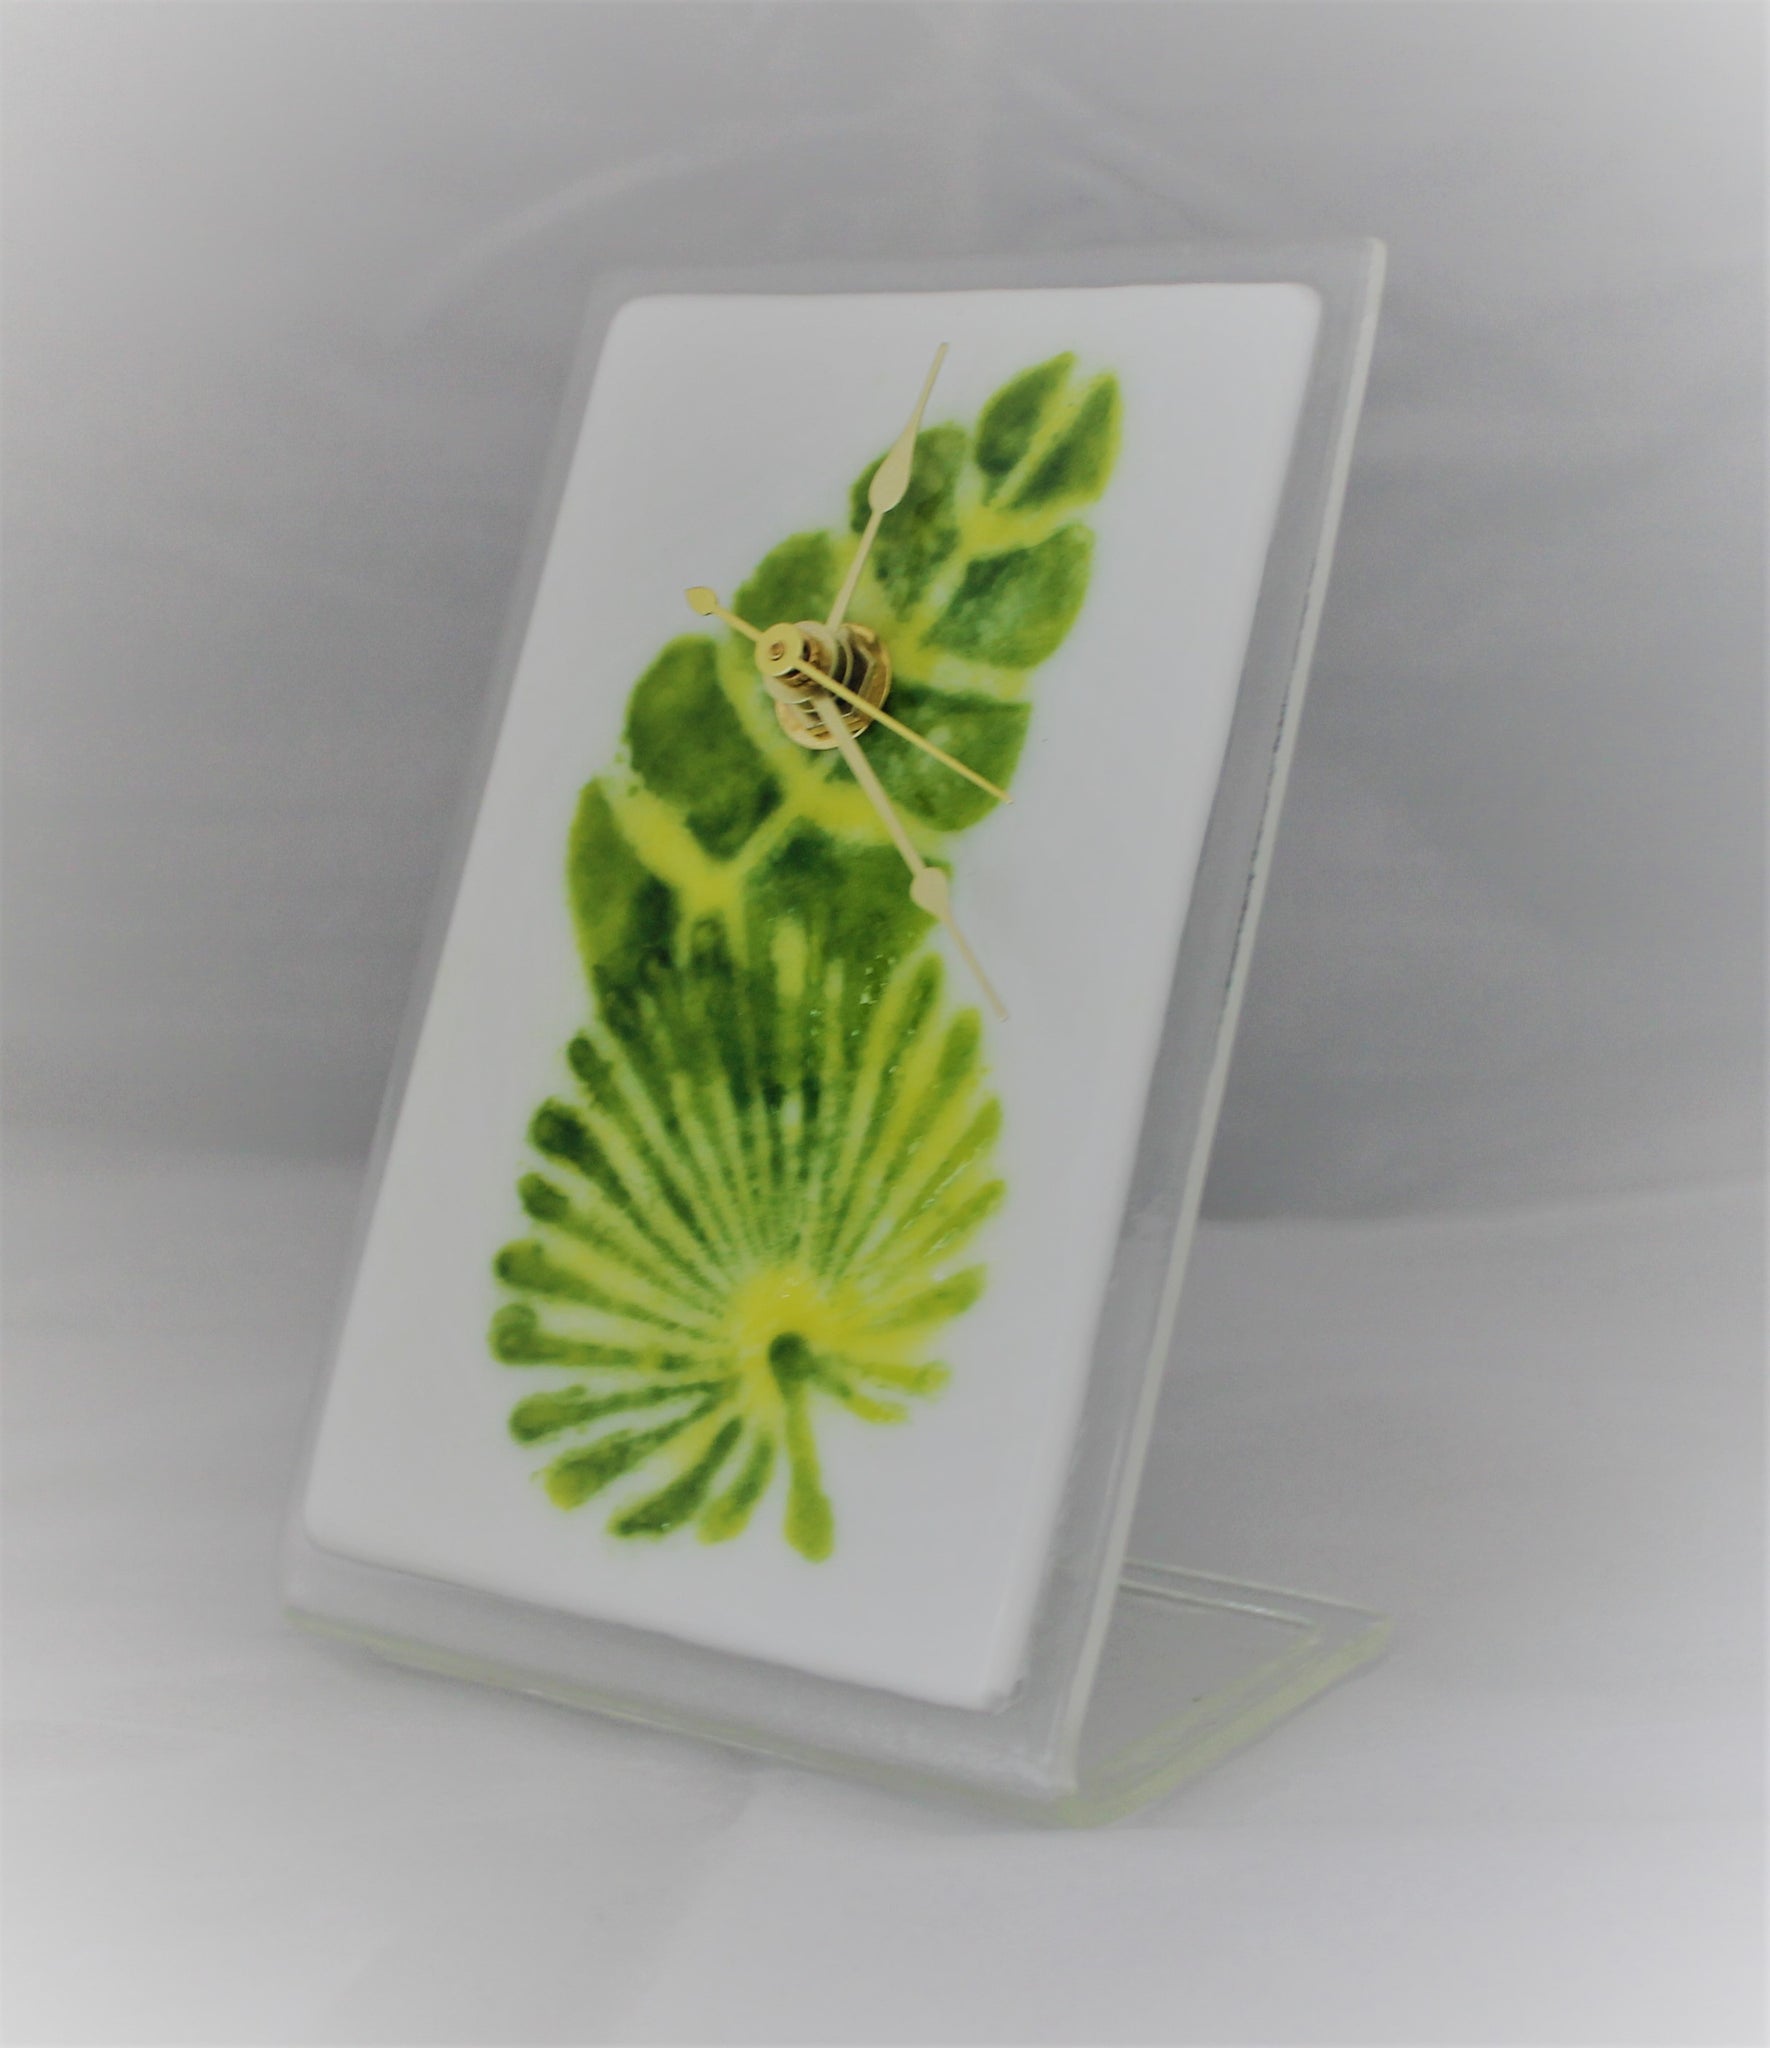 Fused Glass Free Standing Desk Clock with Palm Design